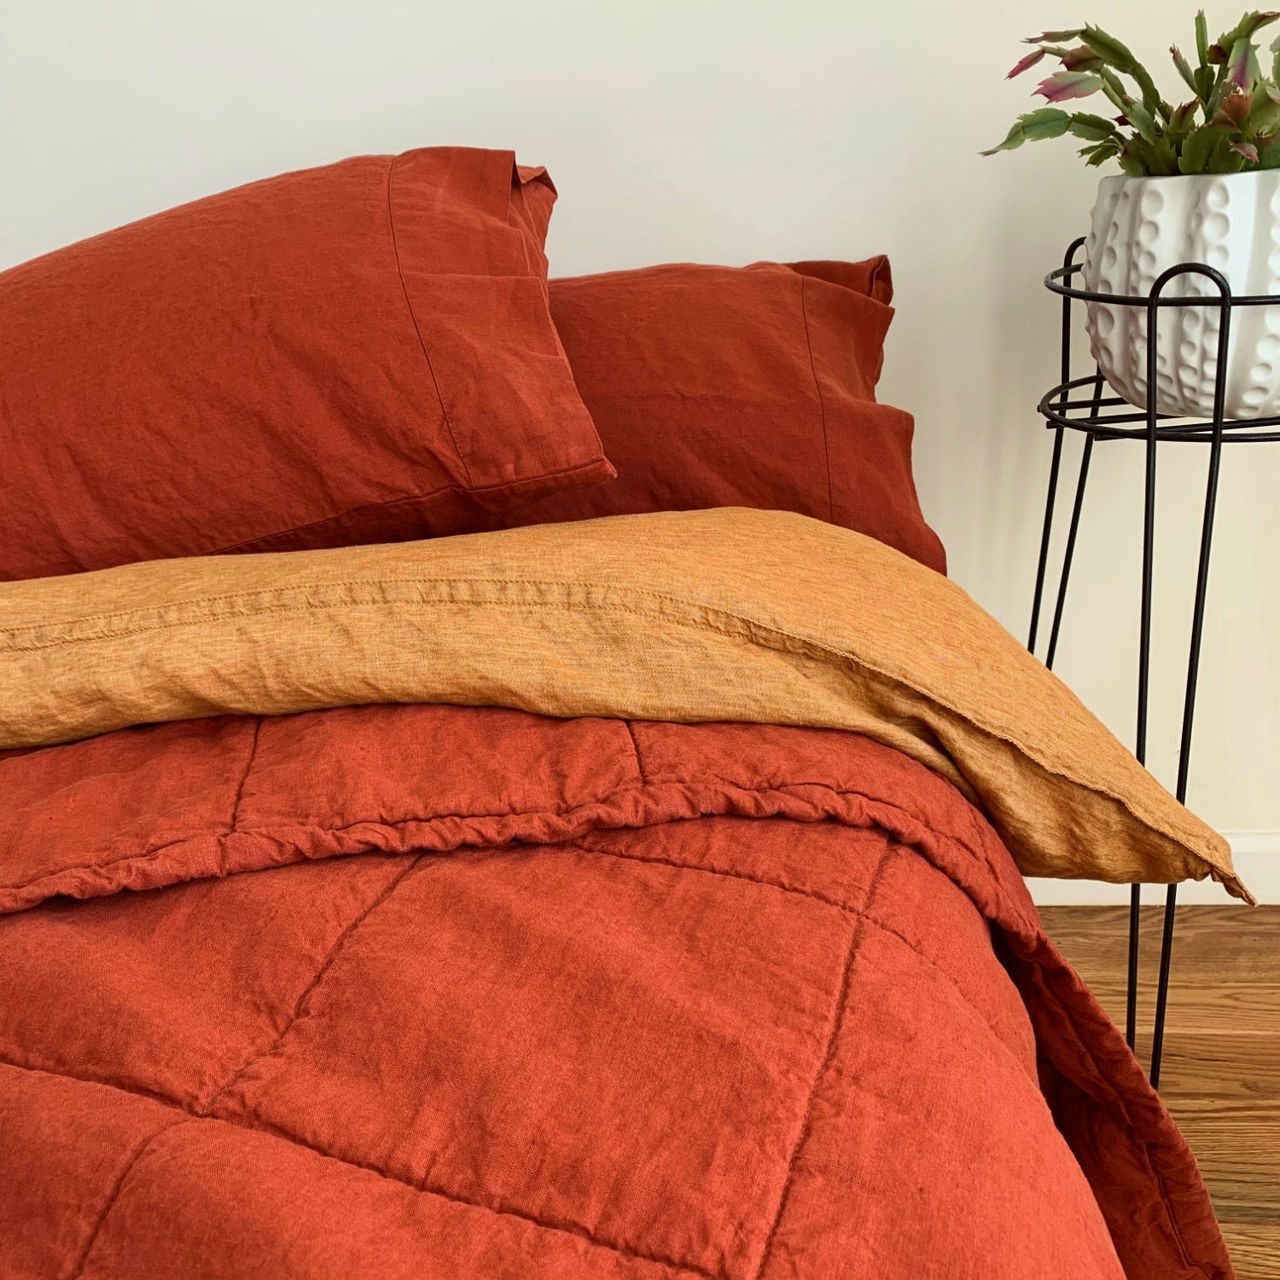 Duvet Vs Comforter The Difference, What Does Duvet Cover Mean